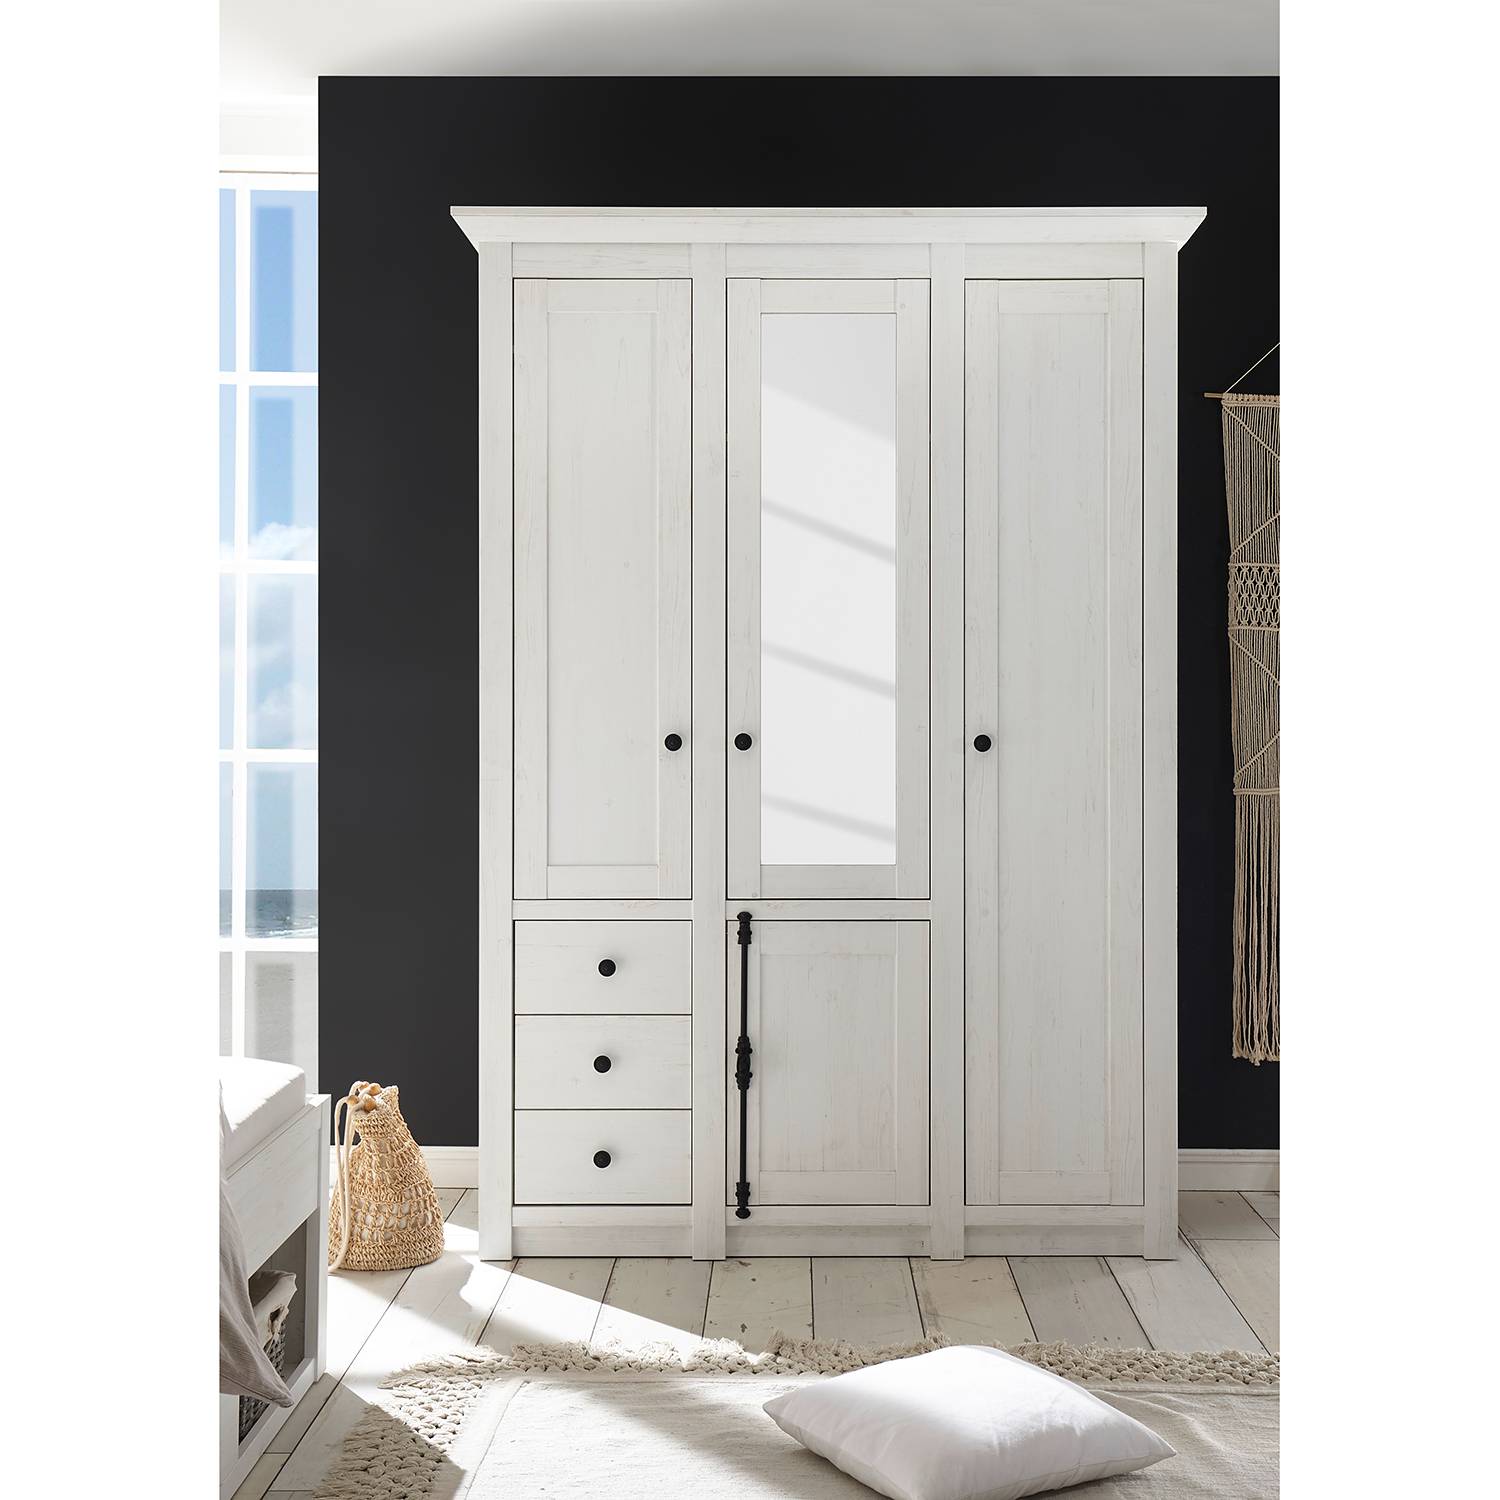 Image of Armoire Geestland 000000001000132096